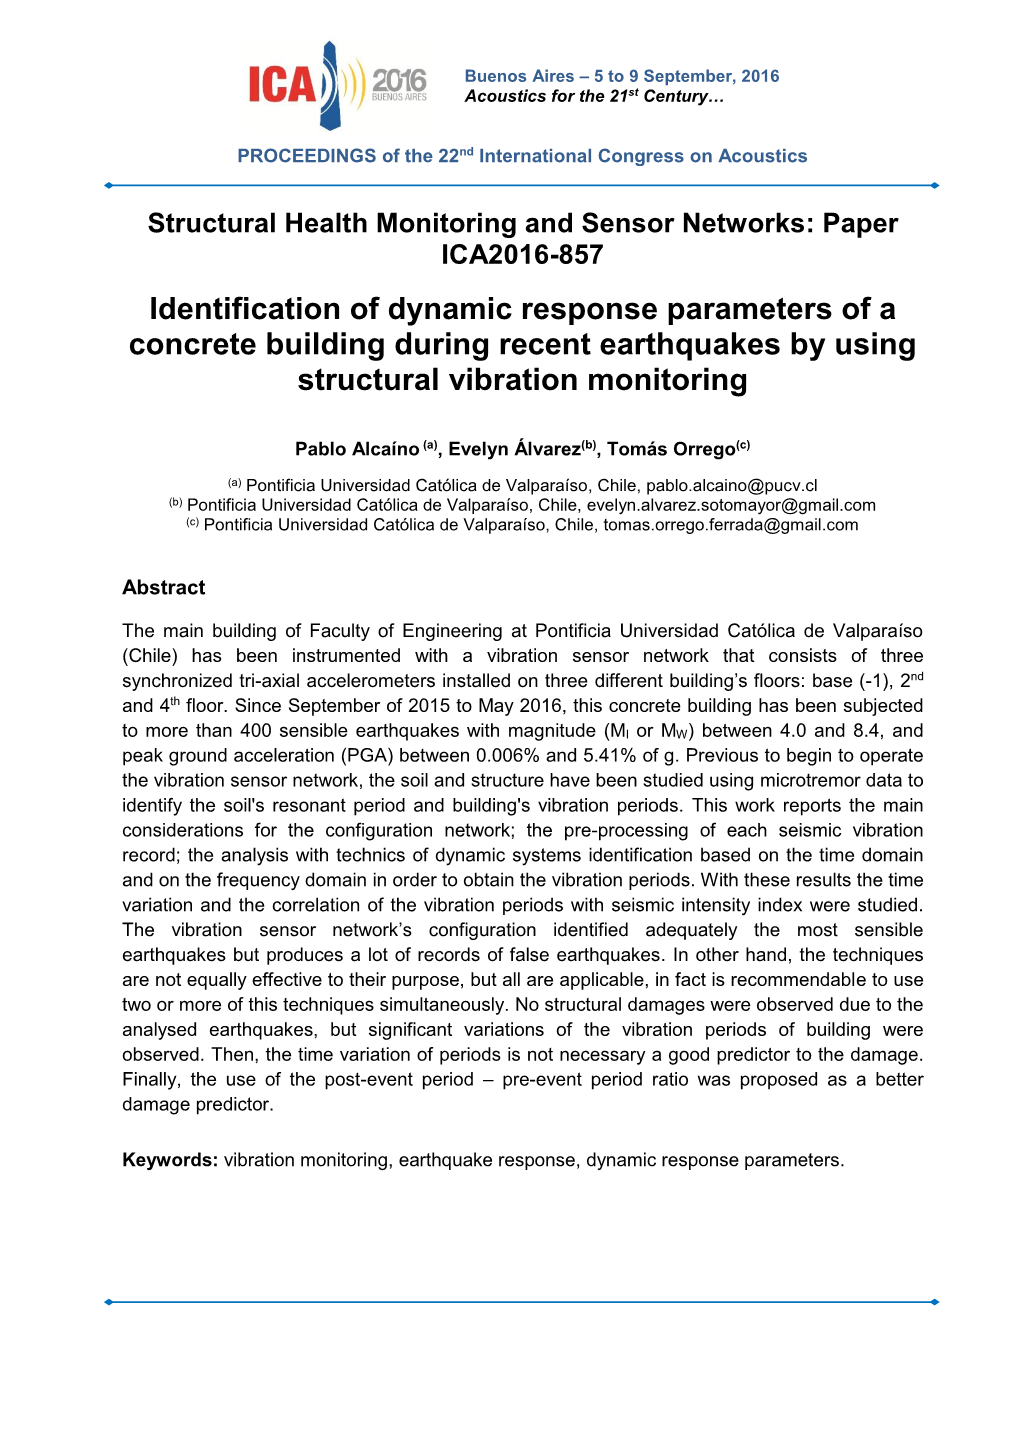 Paper ICA2016-857 Identification of Dynamic Response Parameters of a Concrete Building During Recent Earthquakes by Using Structural Vibration Monitoring